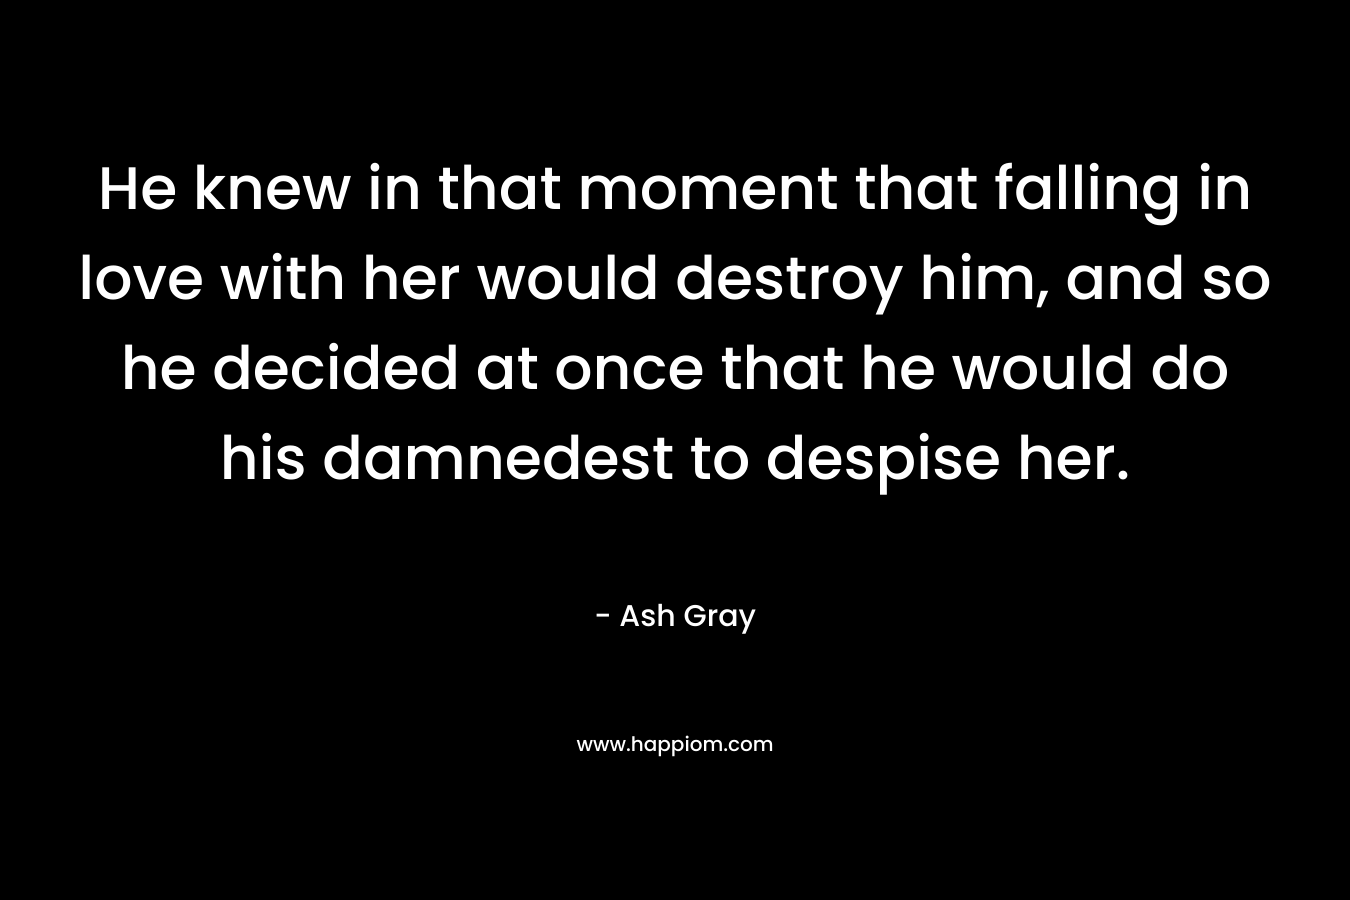 He knew in that moment that falling in love with her would destroy him, and so he decided at once that he would do his damnedest to despise her. – Ash Gray